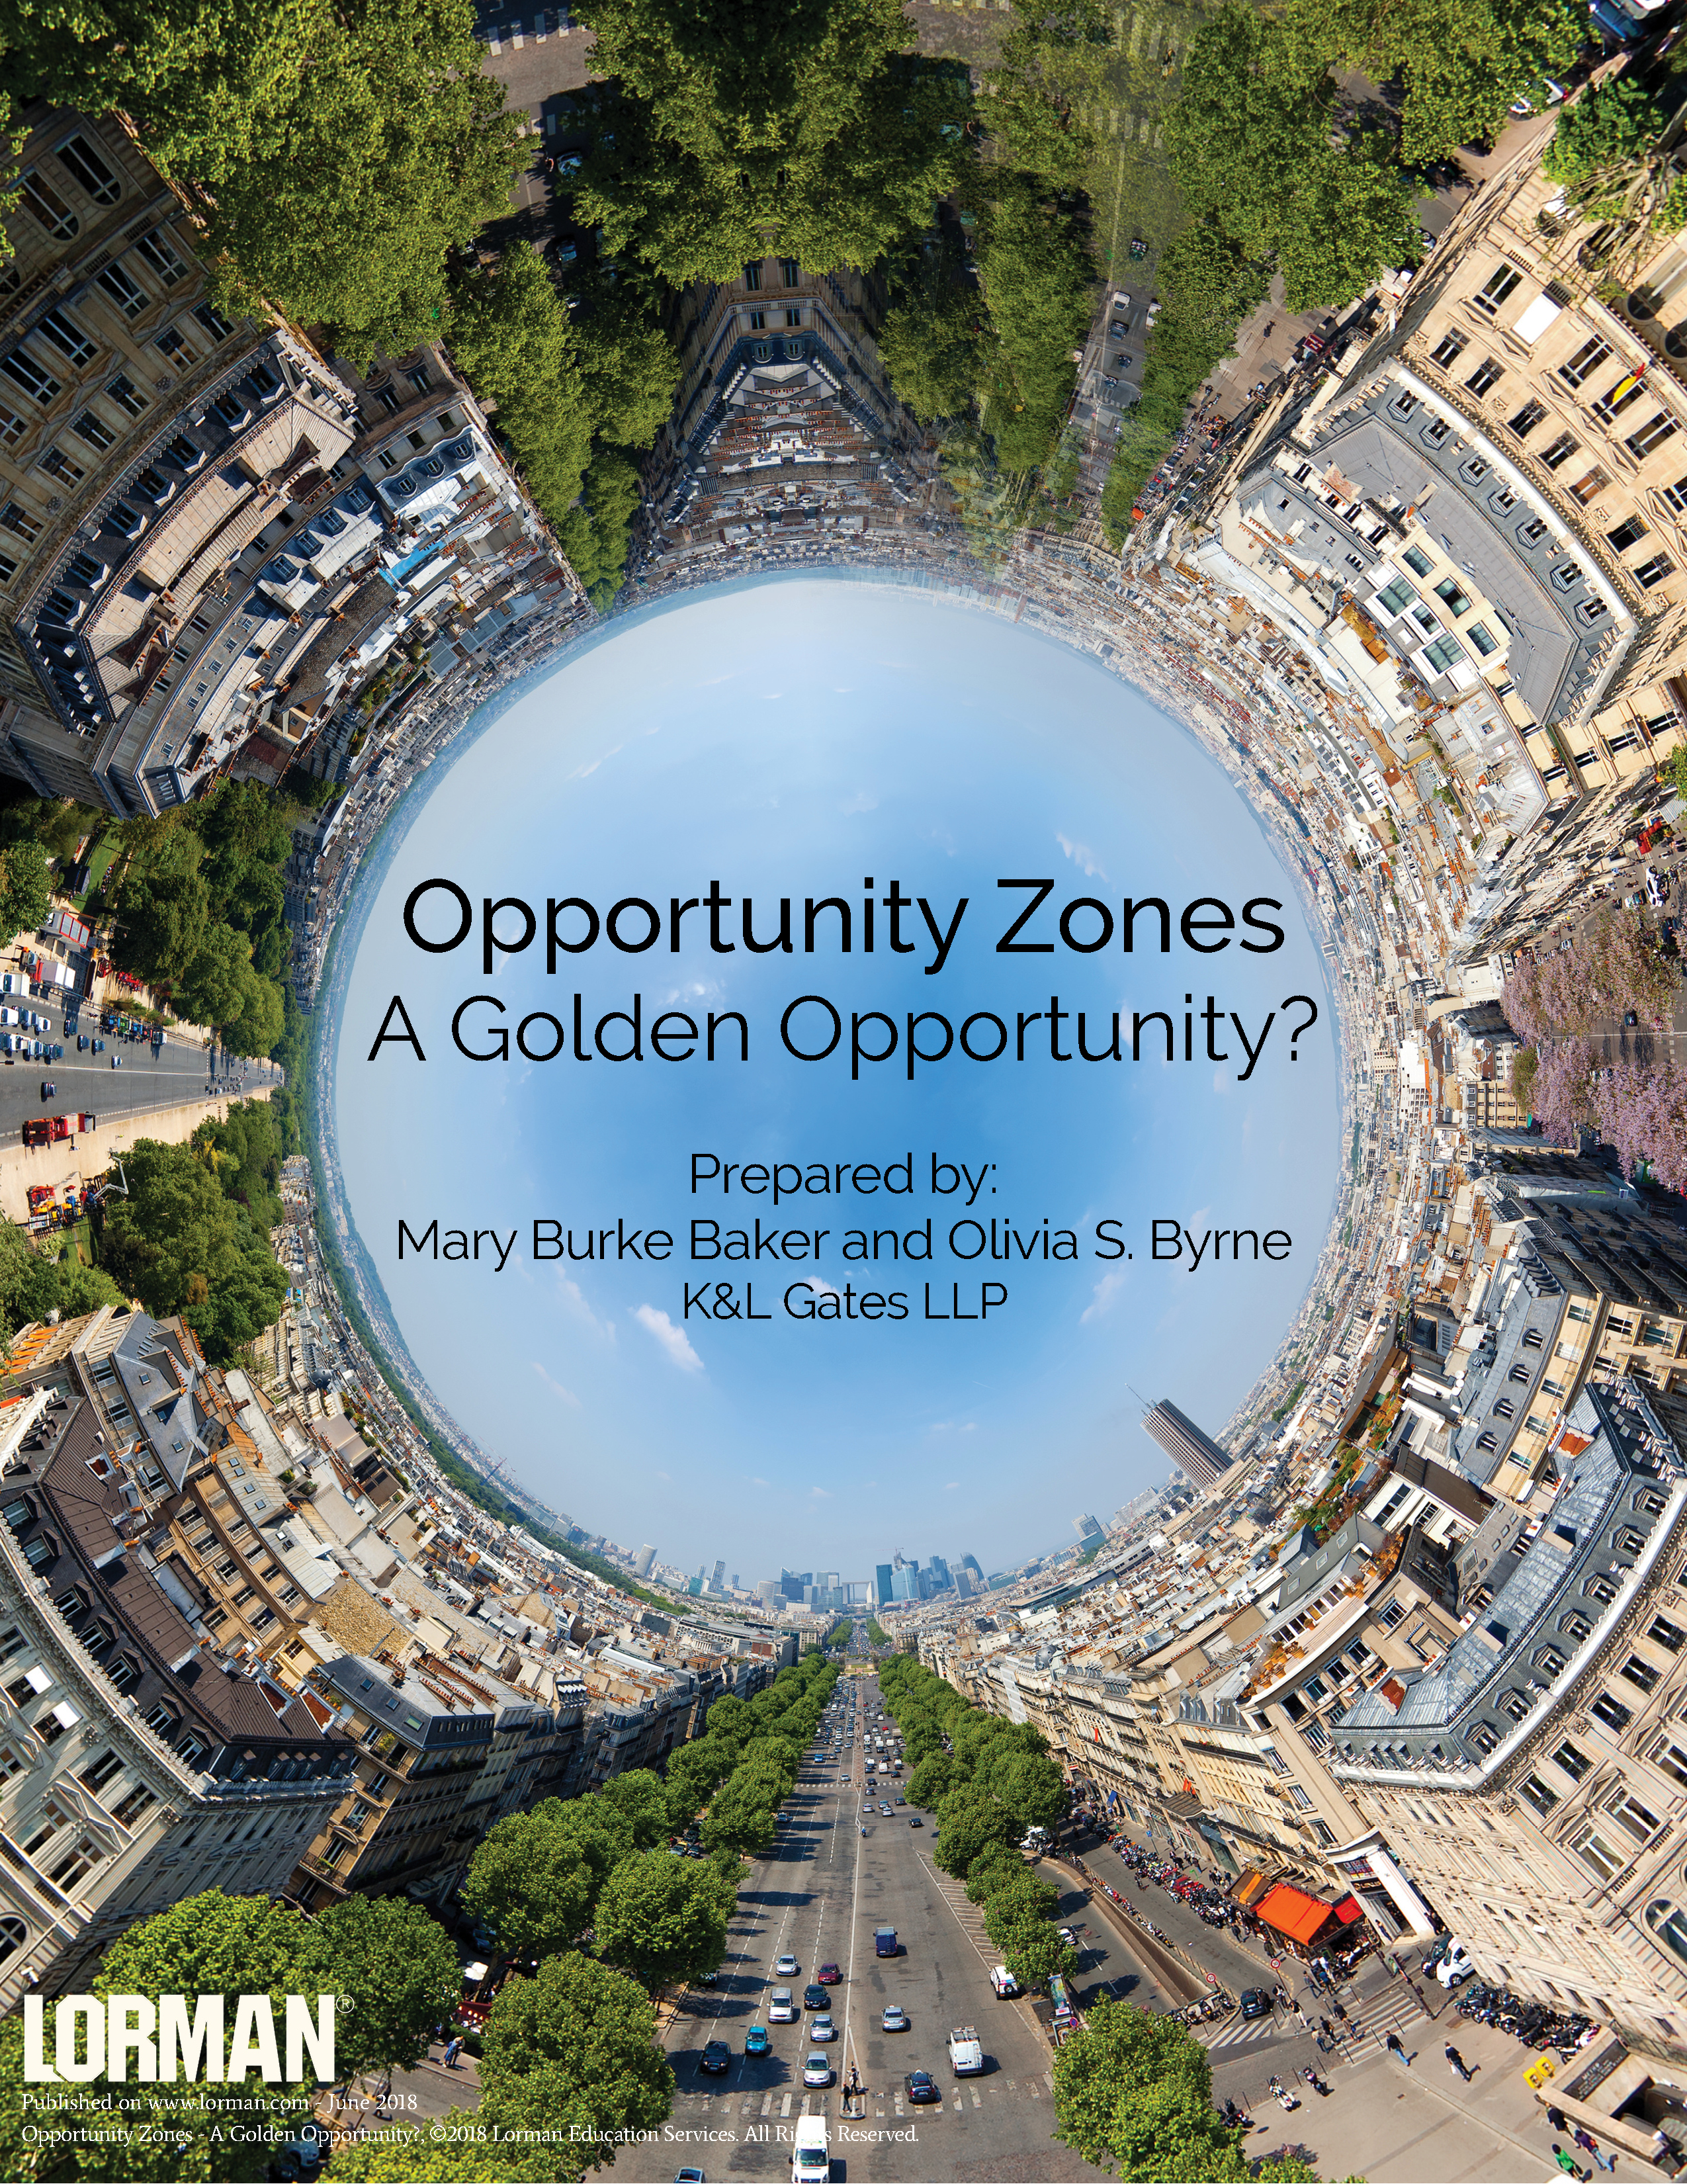 Opportunity Zones - A Golden Opportunity?